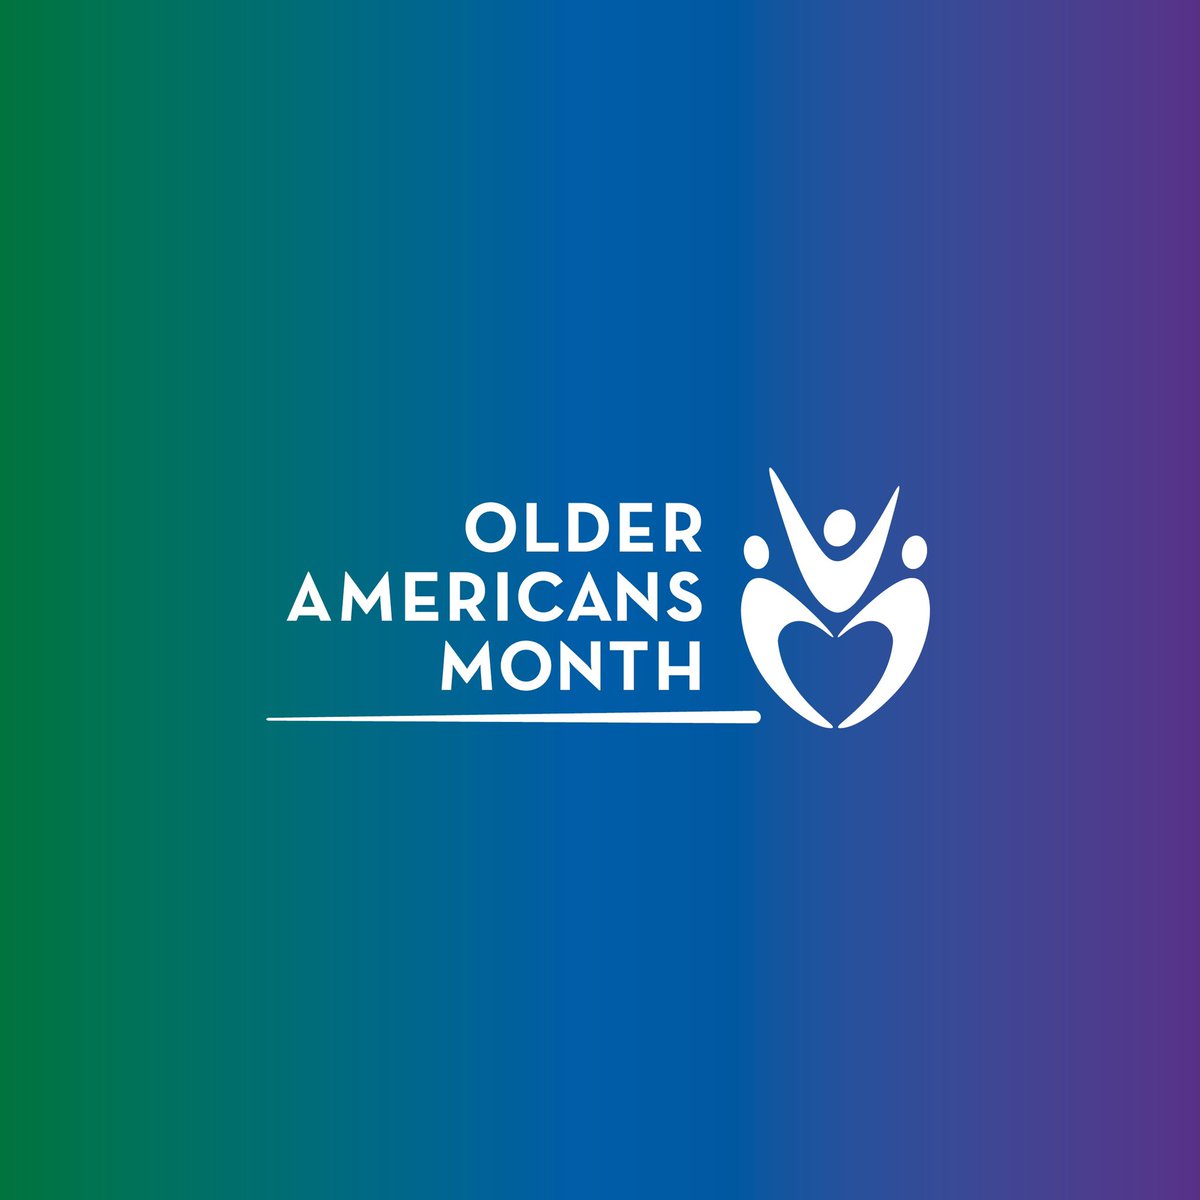 May is Older Americans Month! Let’s keep our minds open about aging - when older adults are engaged, independent, and included, everyone thrives. Throughout the month, we’ll be shining a spotlight on events happening at seniors centers across Cuyahoga County. #OlderAmericansMonth